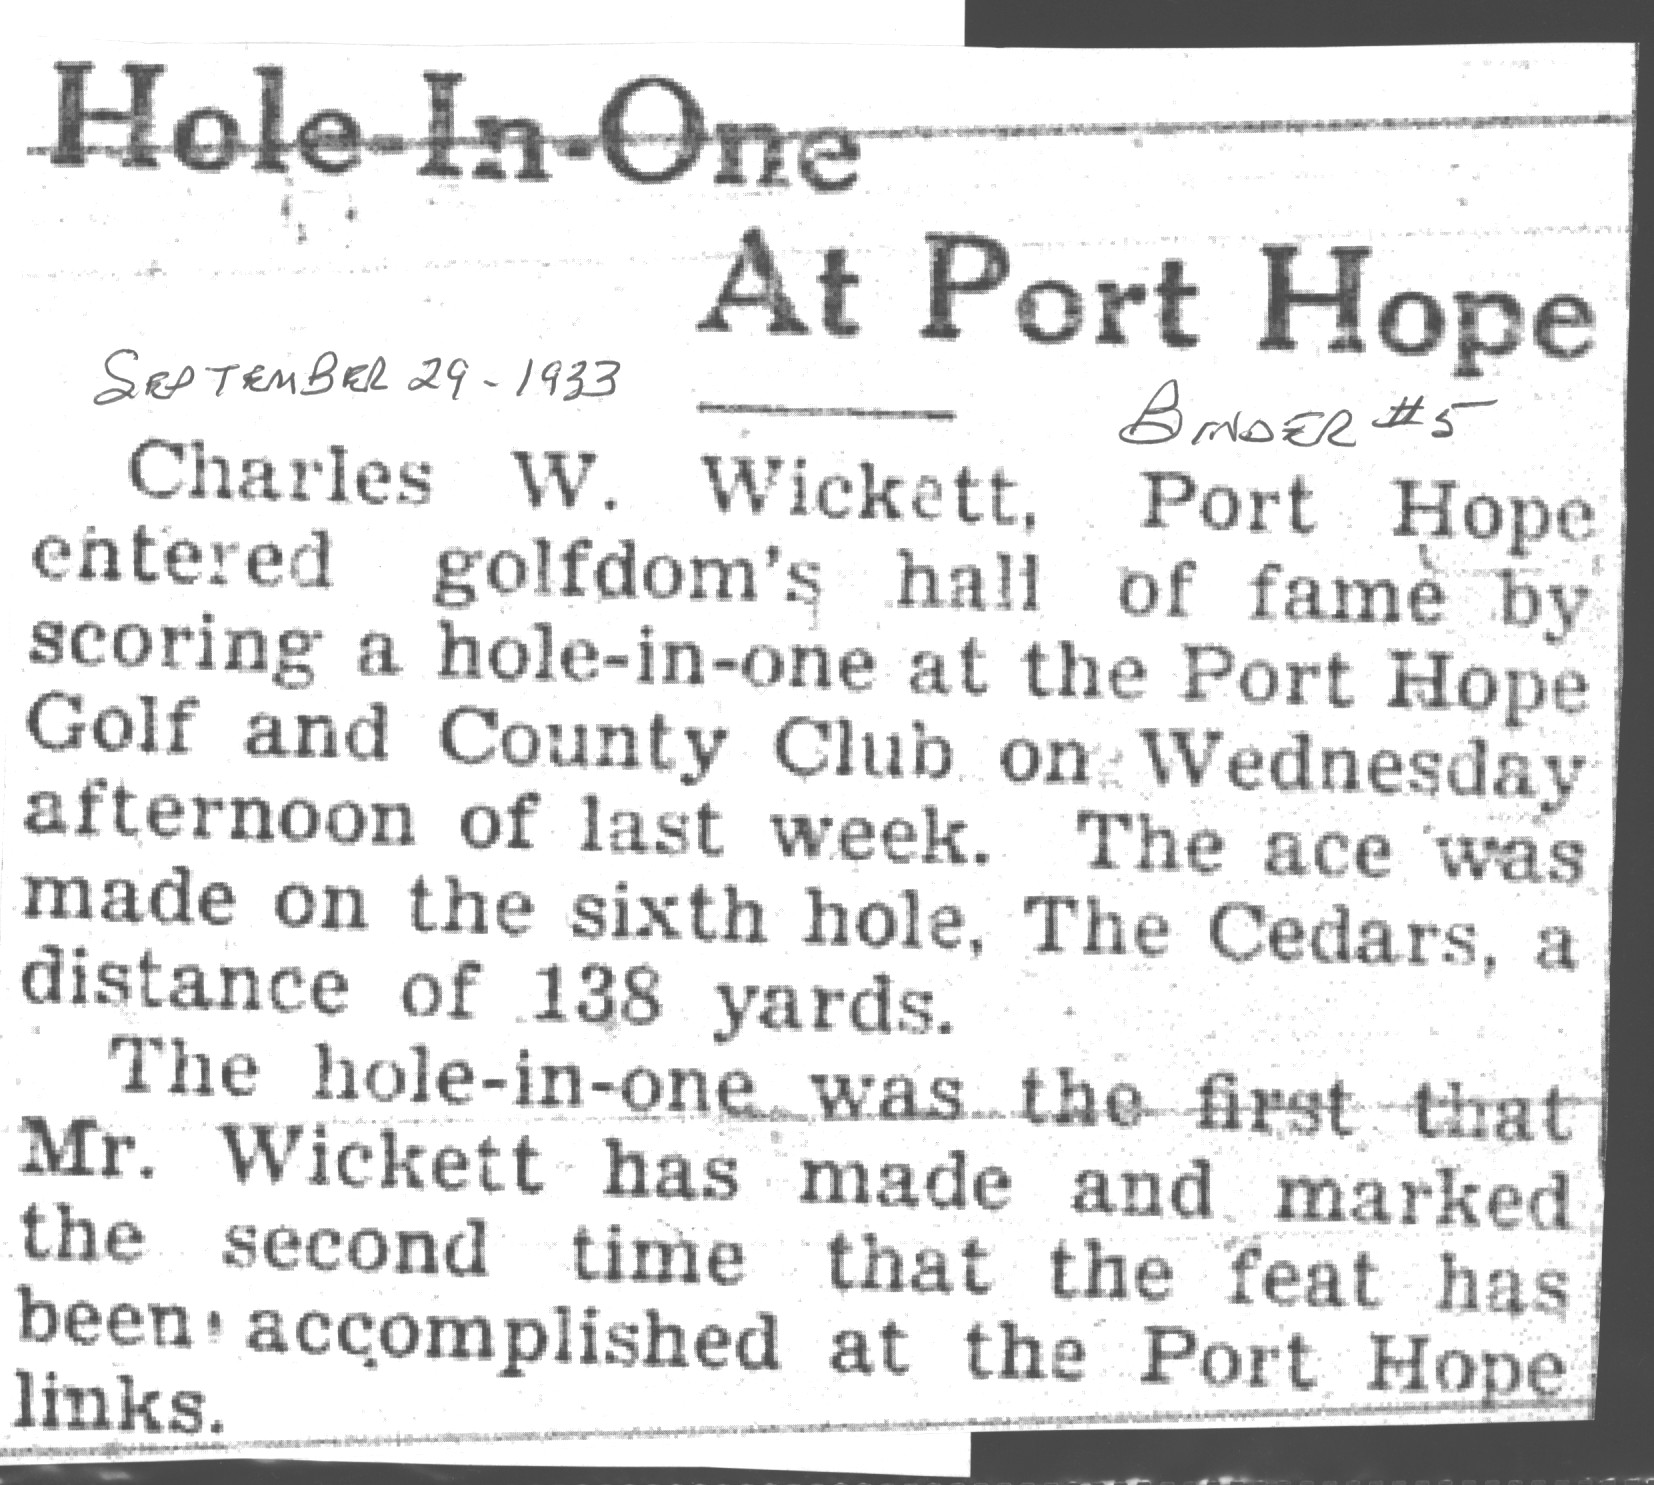 1933-09-29 Golf -Hole-in-one at PH course